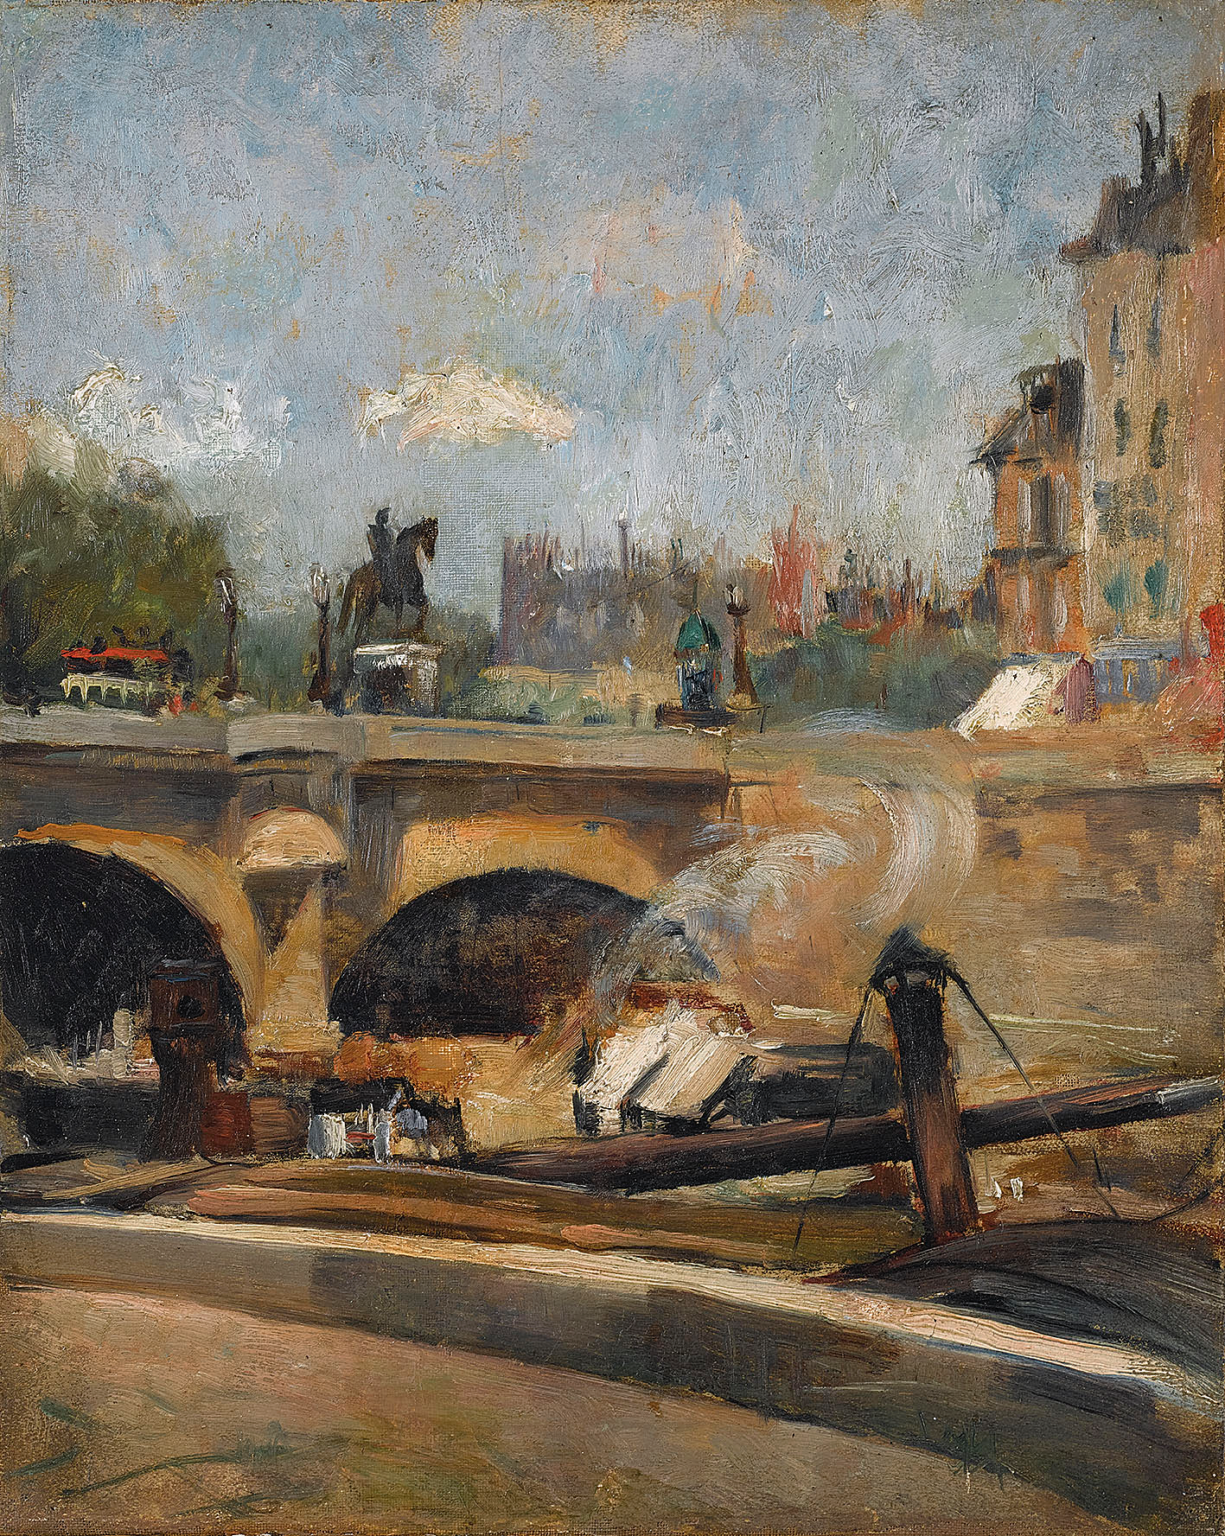 VICTOR TARDIEU (French, 1870-1937)
Le Pont-Neuf à Paris (The New Bridge, Paris)
stamped with atelier stamp 'Victor Tardieu' (on the stretcher)
oil on canvas
41 x 32.5 cm. (16 1/8 x 12 5/8 in.)
Painted between 1905 and 1910
PROVENANCE

Collection of Mrs Alix Turolla-Tardieu, granddaughter of the artist


This season, Christie’s is privileged to be able to handle the sale of a comprehensive collection of works of the late French artist Victor Tardieu from the collection of the artist’s granddaughter, Alix Tardieu. The following text by Alix Tardieu details a personal account of her experiences growing up surrounded by the legacy of her grandfather and father’s art. 

THE LEGACY OF VICTOR AND JEAN TARDIEU
By Alix Tardieu

If I revisit my childhood memories, the image of my grandfather, Victor Tardieu the painter, becomes intimately blurred with that of my father, Jean Tardieu the writer. My grandfather passed away before I was born, but I came to know him through the many weekends that I spent at the home of my grandmother, Caline, where his presence was palpable. 

During these tranquil weekends, aside from playing the piano with my grandmother, who had been a professional harpist, I would also rummage about in the attic by myself. This was perfumed with the smell of wood, and filled with paintings by my grandfather. I would stand before the different subjects of the canvases, looking at the bows of ships at Liverpool and pretty dresses of ladies in sunny gardens, as well as people of Asian ancestry and bronzed skins wearing clothing in sumptuously warm colours.

When I would come down from the attic, my grandmother would invariably talk to me at length about my grandfather’s talent, his success before the Great War, his study trips when they were just newlyweds, and always about the great endeavors to which he had devoted himself from the moment he arrived in Hanoi in 1921: the mural in the auditorium of the its university and at the same time, the creation of a School of Fine Arts where he was going to meet and guide young Vietnamese artists “more gifted than our family”, as he would say. 

My time during these tranquil weekends were also spent taking long walks in the forest with my parents, and often on readings that my father gave of what he had written in the night as well.

Both Victor Tardieu and Jean Tardieu enjoyed success and recognition for their work for a good many years in their lifetime, as a painter and a writer respectively. Today, the public is discovering anew and once again seeking the artworks of my grandfather, while the literary works of my father are Jean have become classics of the French language. I look forward to playing my part in passing on their legacy, as my children will continue to do after me.